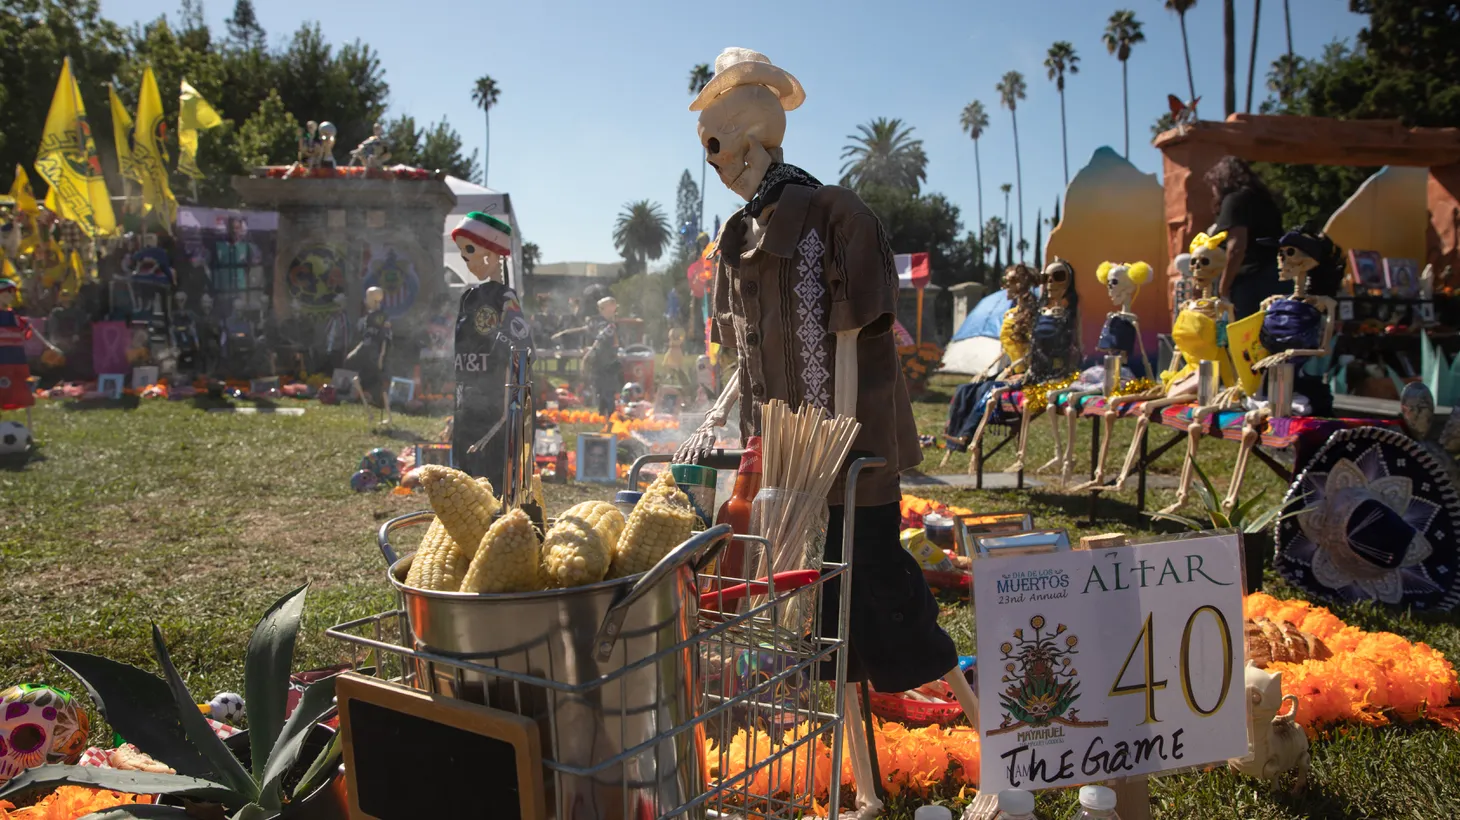 Alfredo Romero’s altar is filled with decorative skeletons representing figures like the “corn man” pushing his cart throughout the grounds.